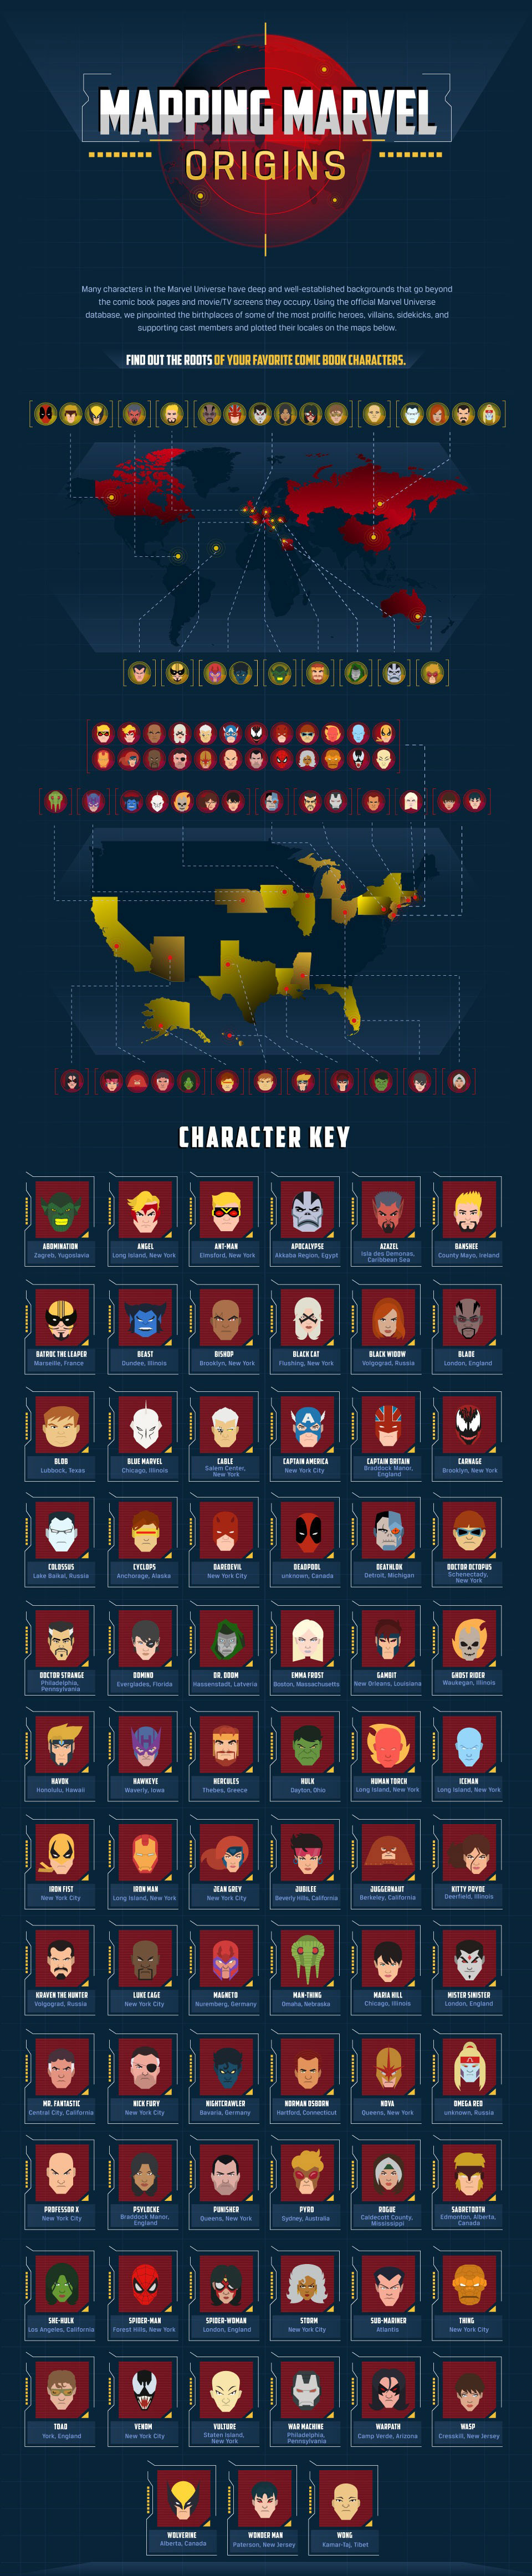 marvel character map